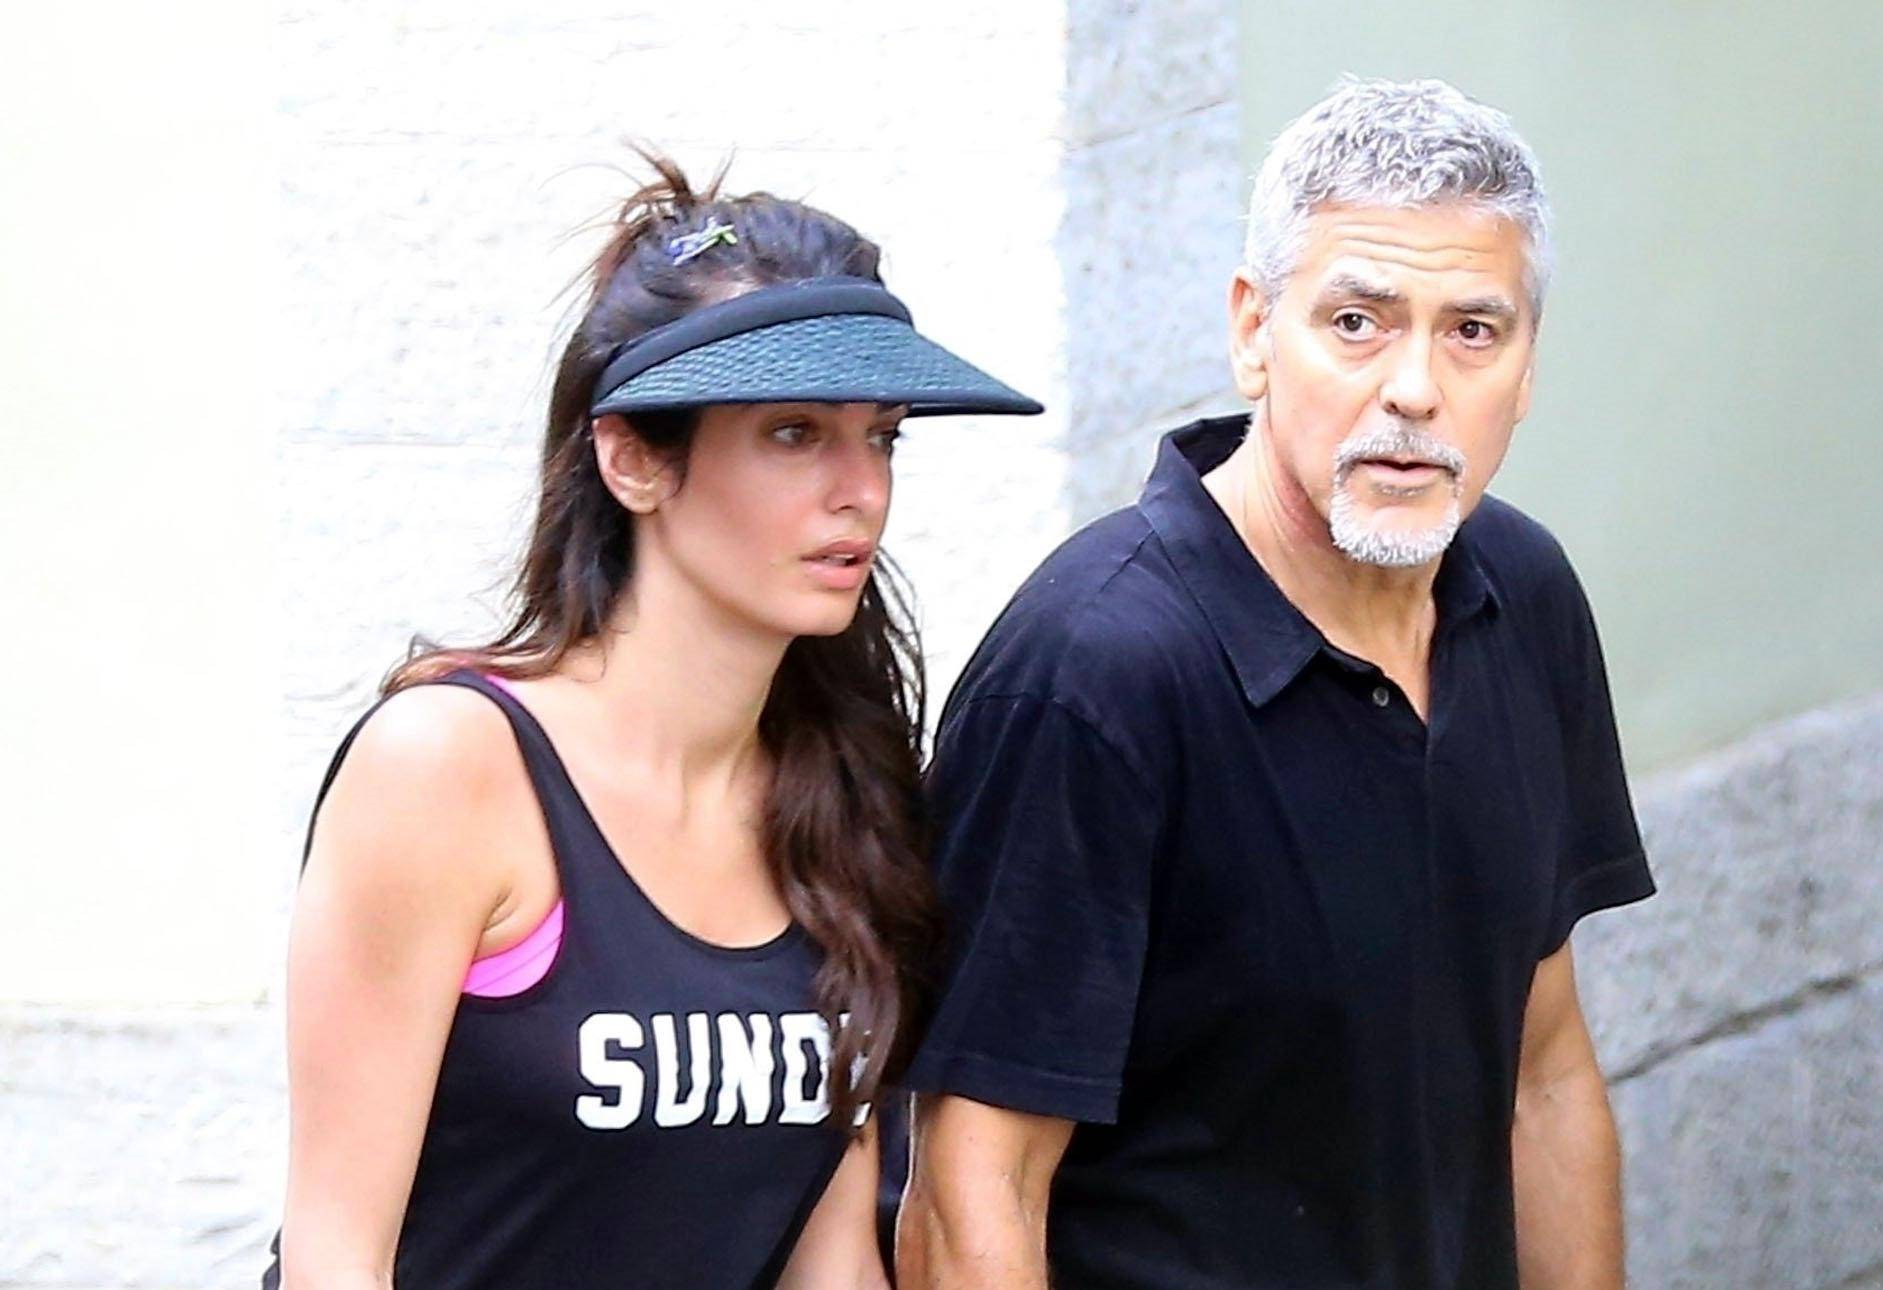 *PREMIUM-EXCLUSIVE* *MUST CALL FOR PRICING BEFORE USAGE**NOT AVAILABLE FOR ONLINE SUBSCRIPTIONS* Actor George Clooney and his wife Amal in Laglio